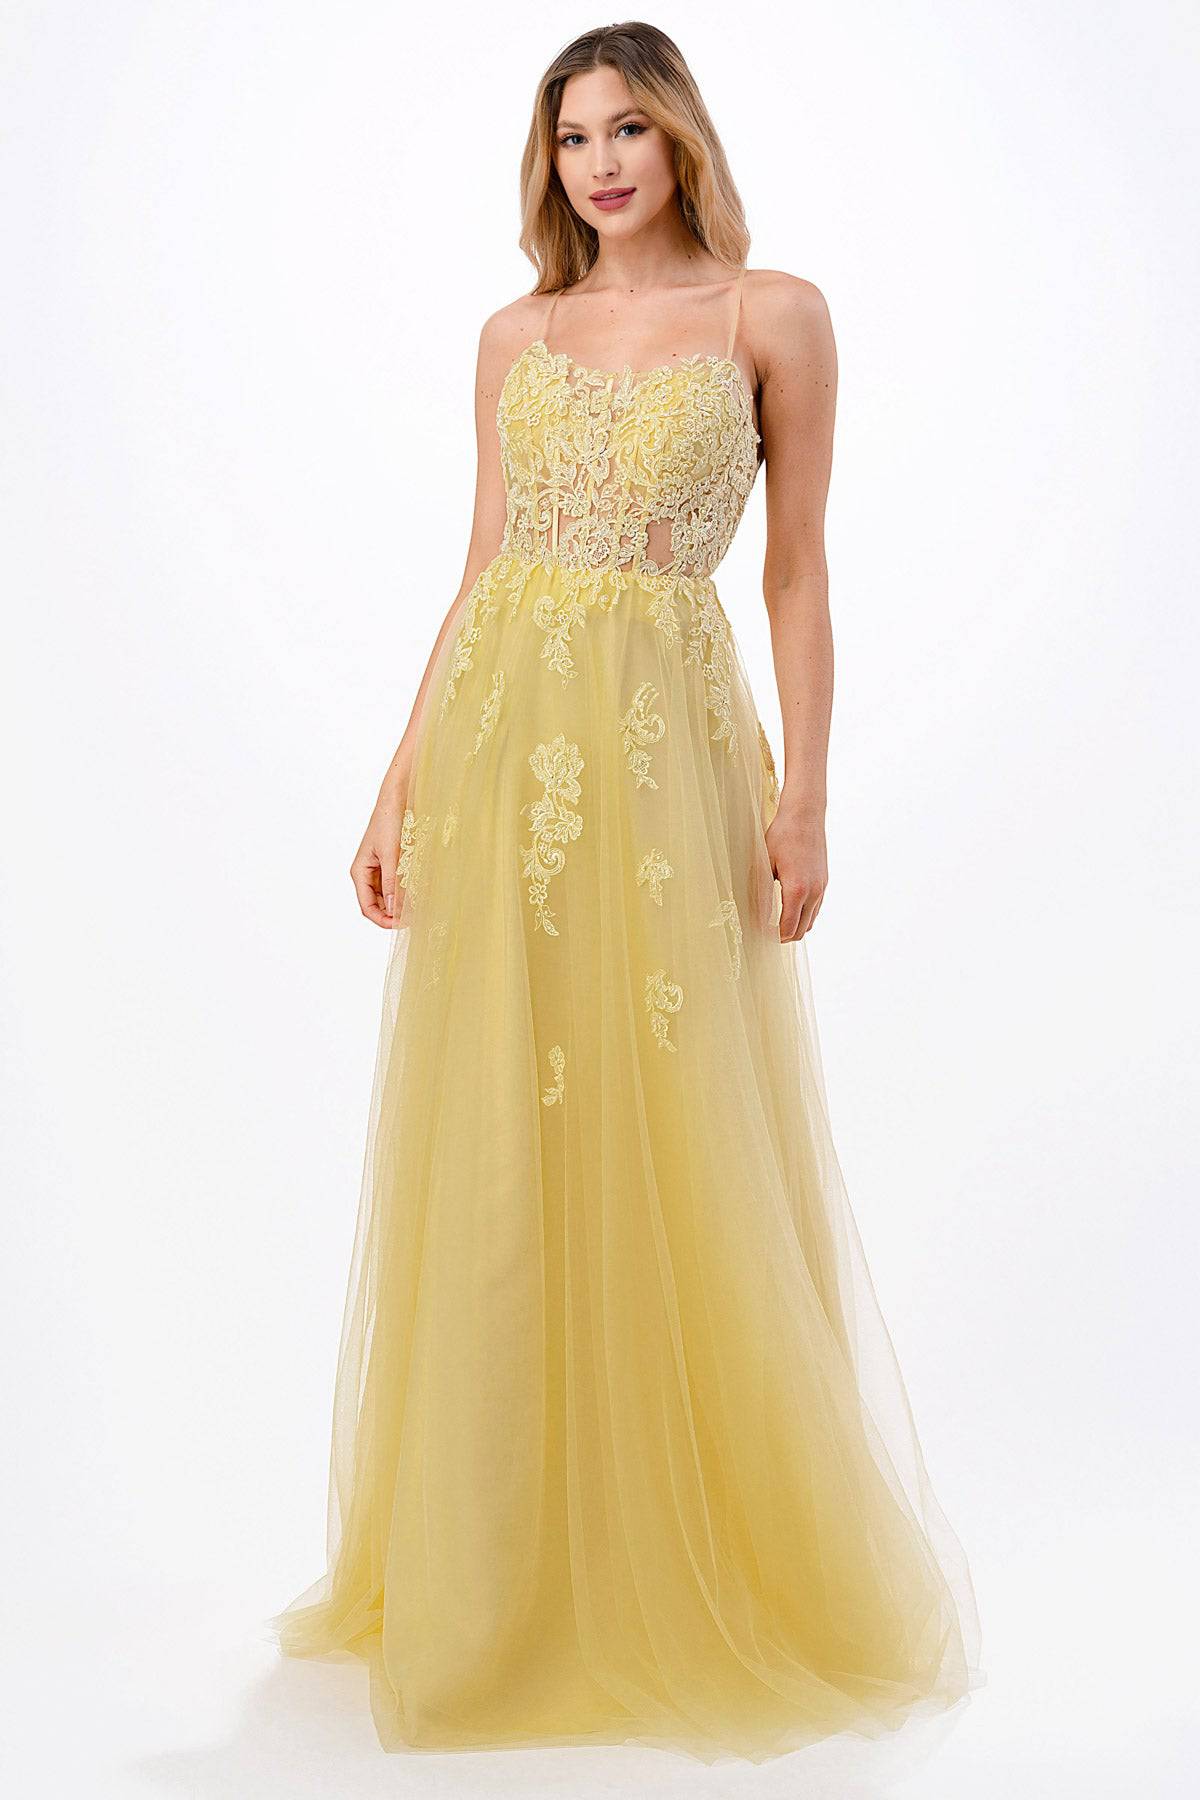 Aspeed Design L2657 Lace Embroidered Tulle Yellow Corset Dress